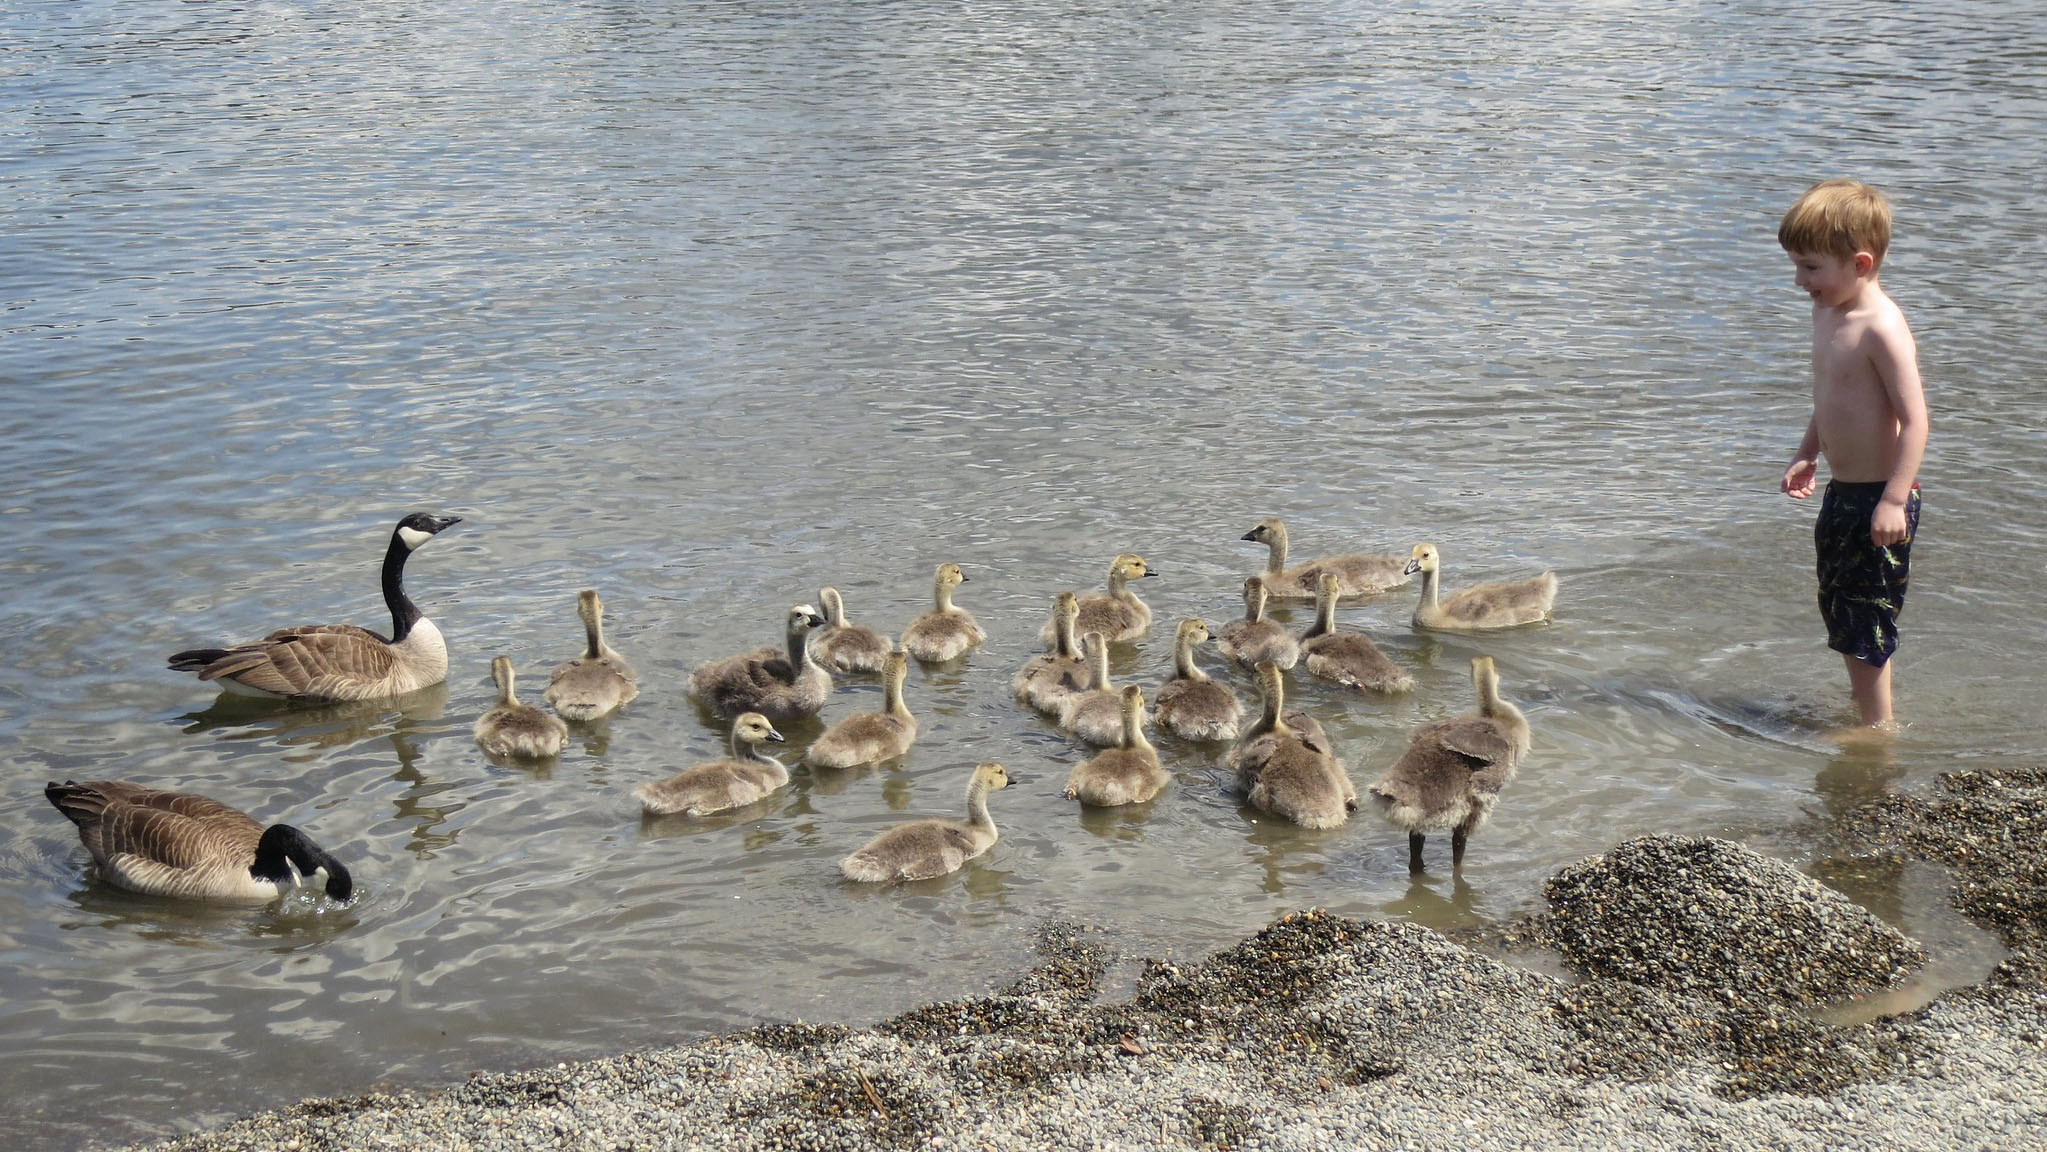 A young boy at a beach, encountering two adult Canada geese and a large number of fluffy goslings.